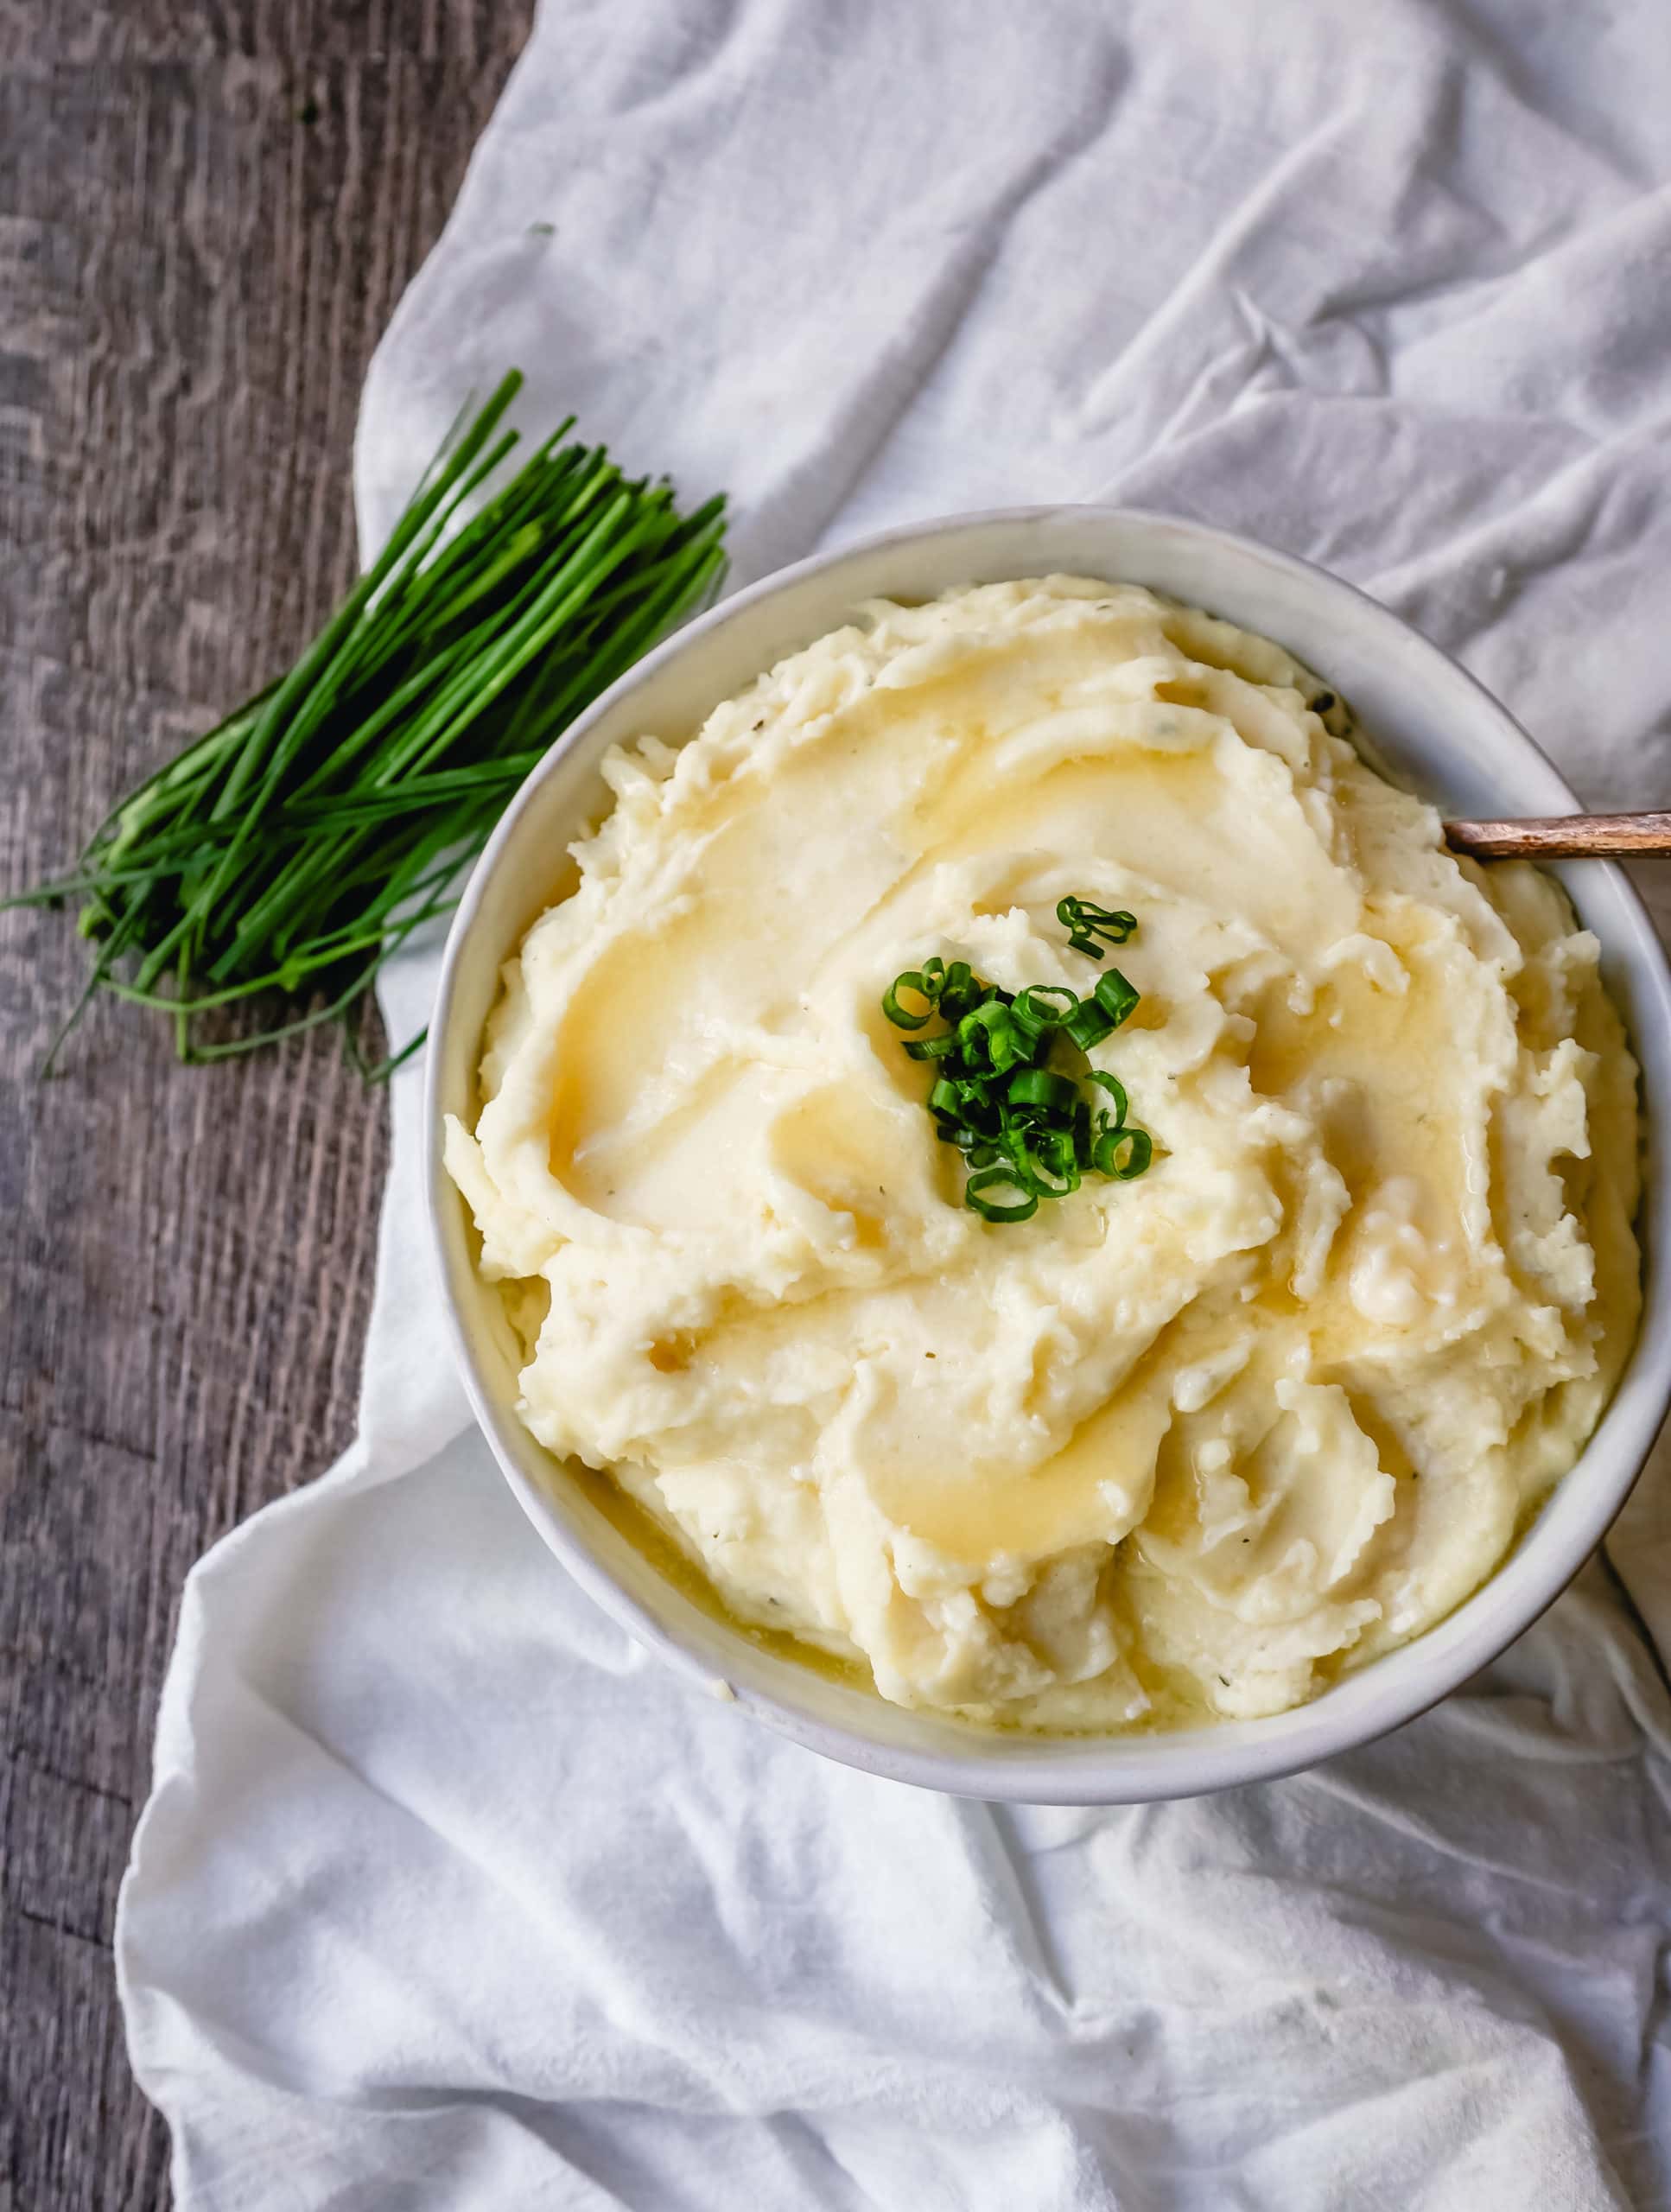 Boursin Cheese Creamy Mashed Potatoes Buttery, creamy homemade mashed potatoes with garlic and herb Boursin cheese. So flavorful, you don't even need the gravy!